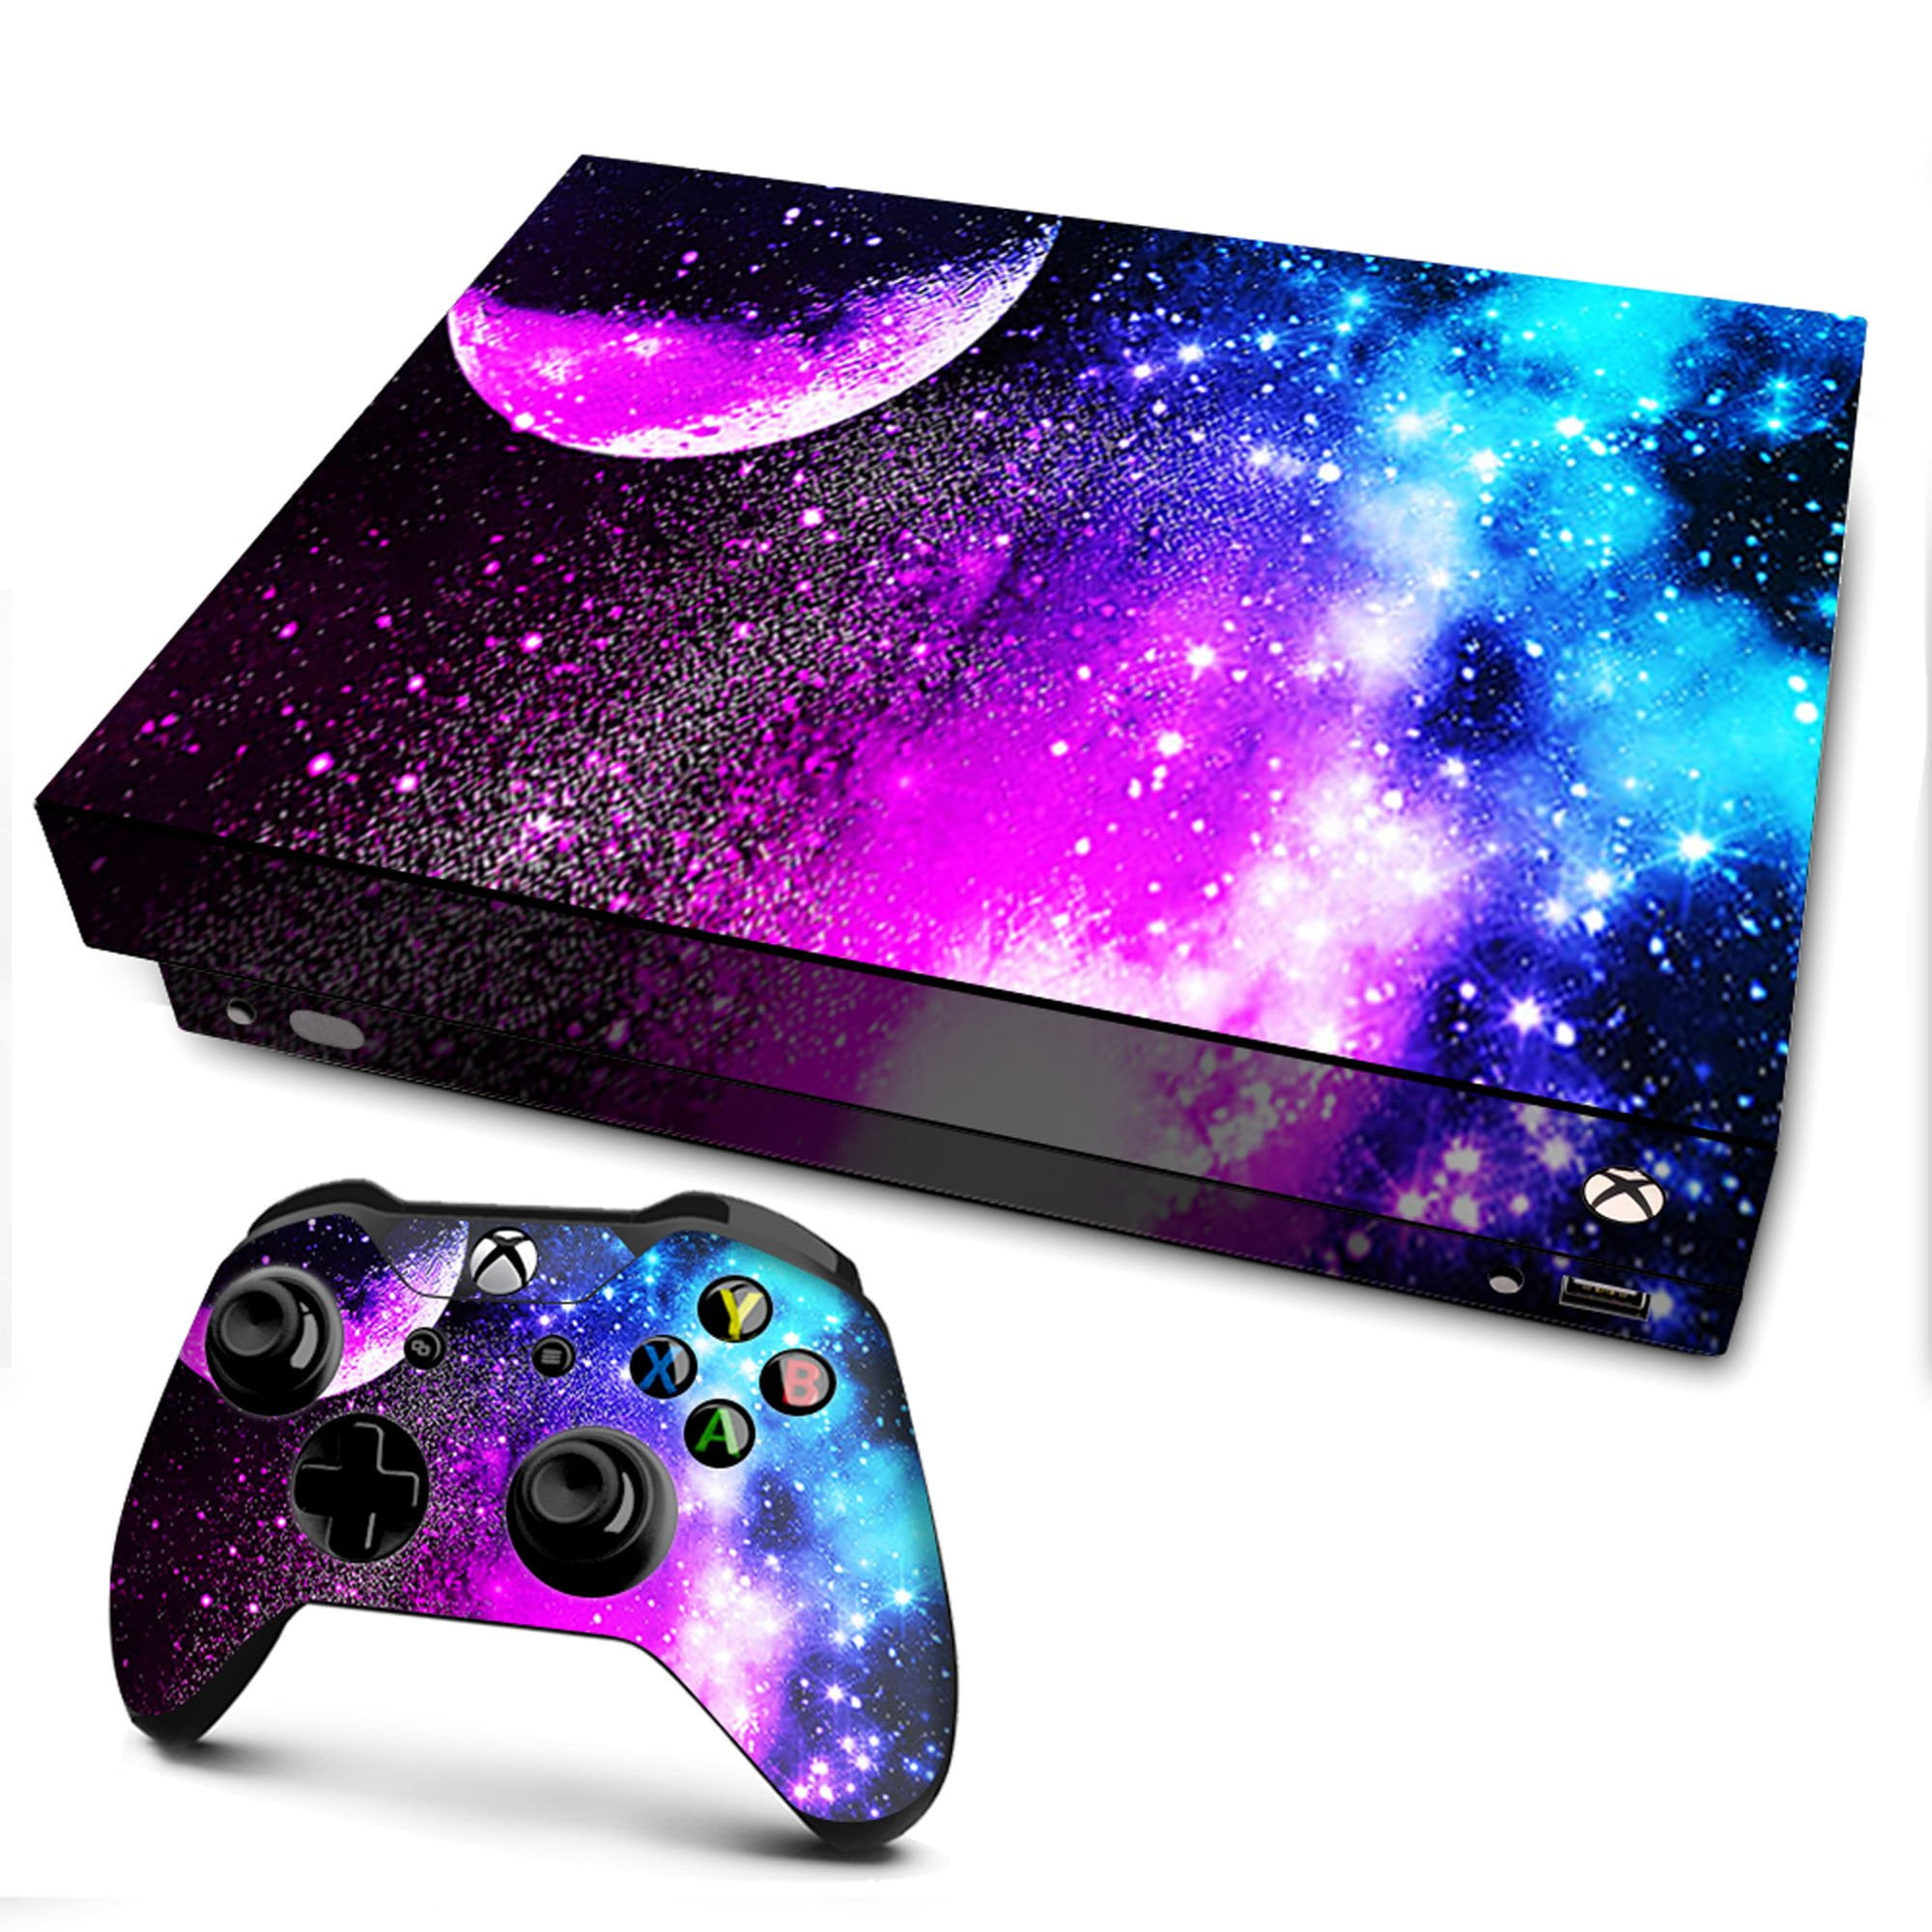 Skins Decal Vinyl Wrap For Xbox One X Console Decal Stickers Skins Cover Galaxy Fluorescent